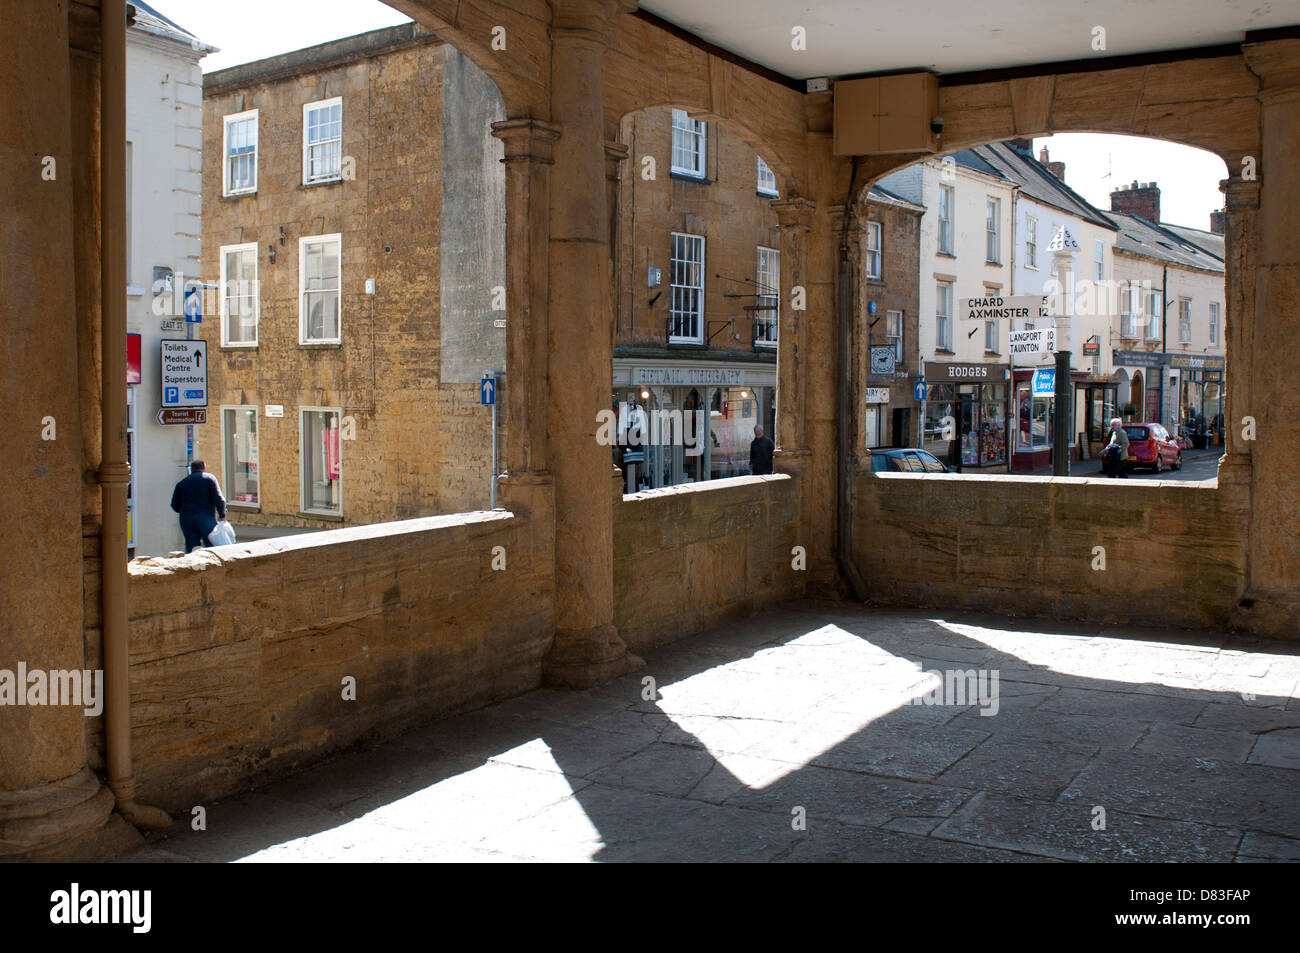 View from inside the Market House, Ilminster, Somerset, England, UK Stock Photo